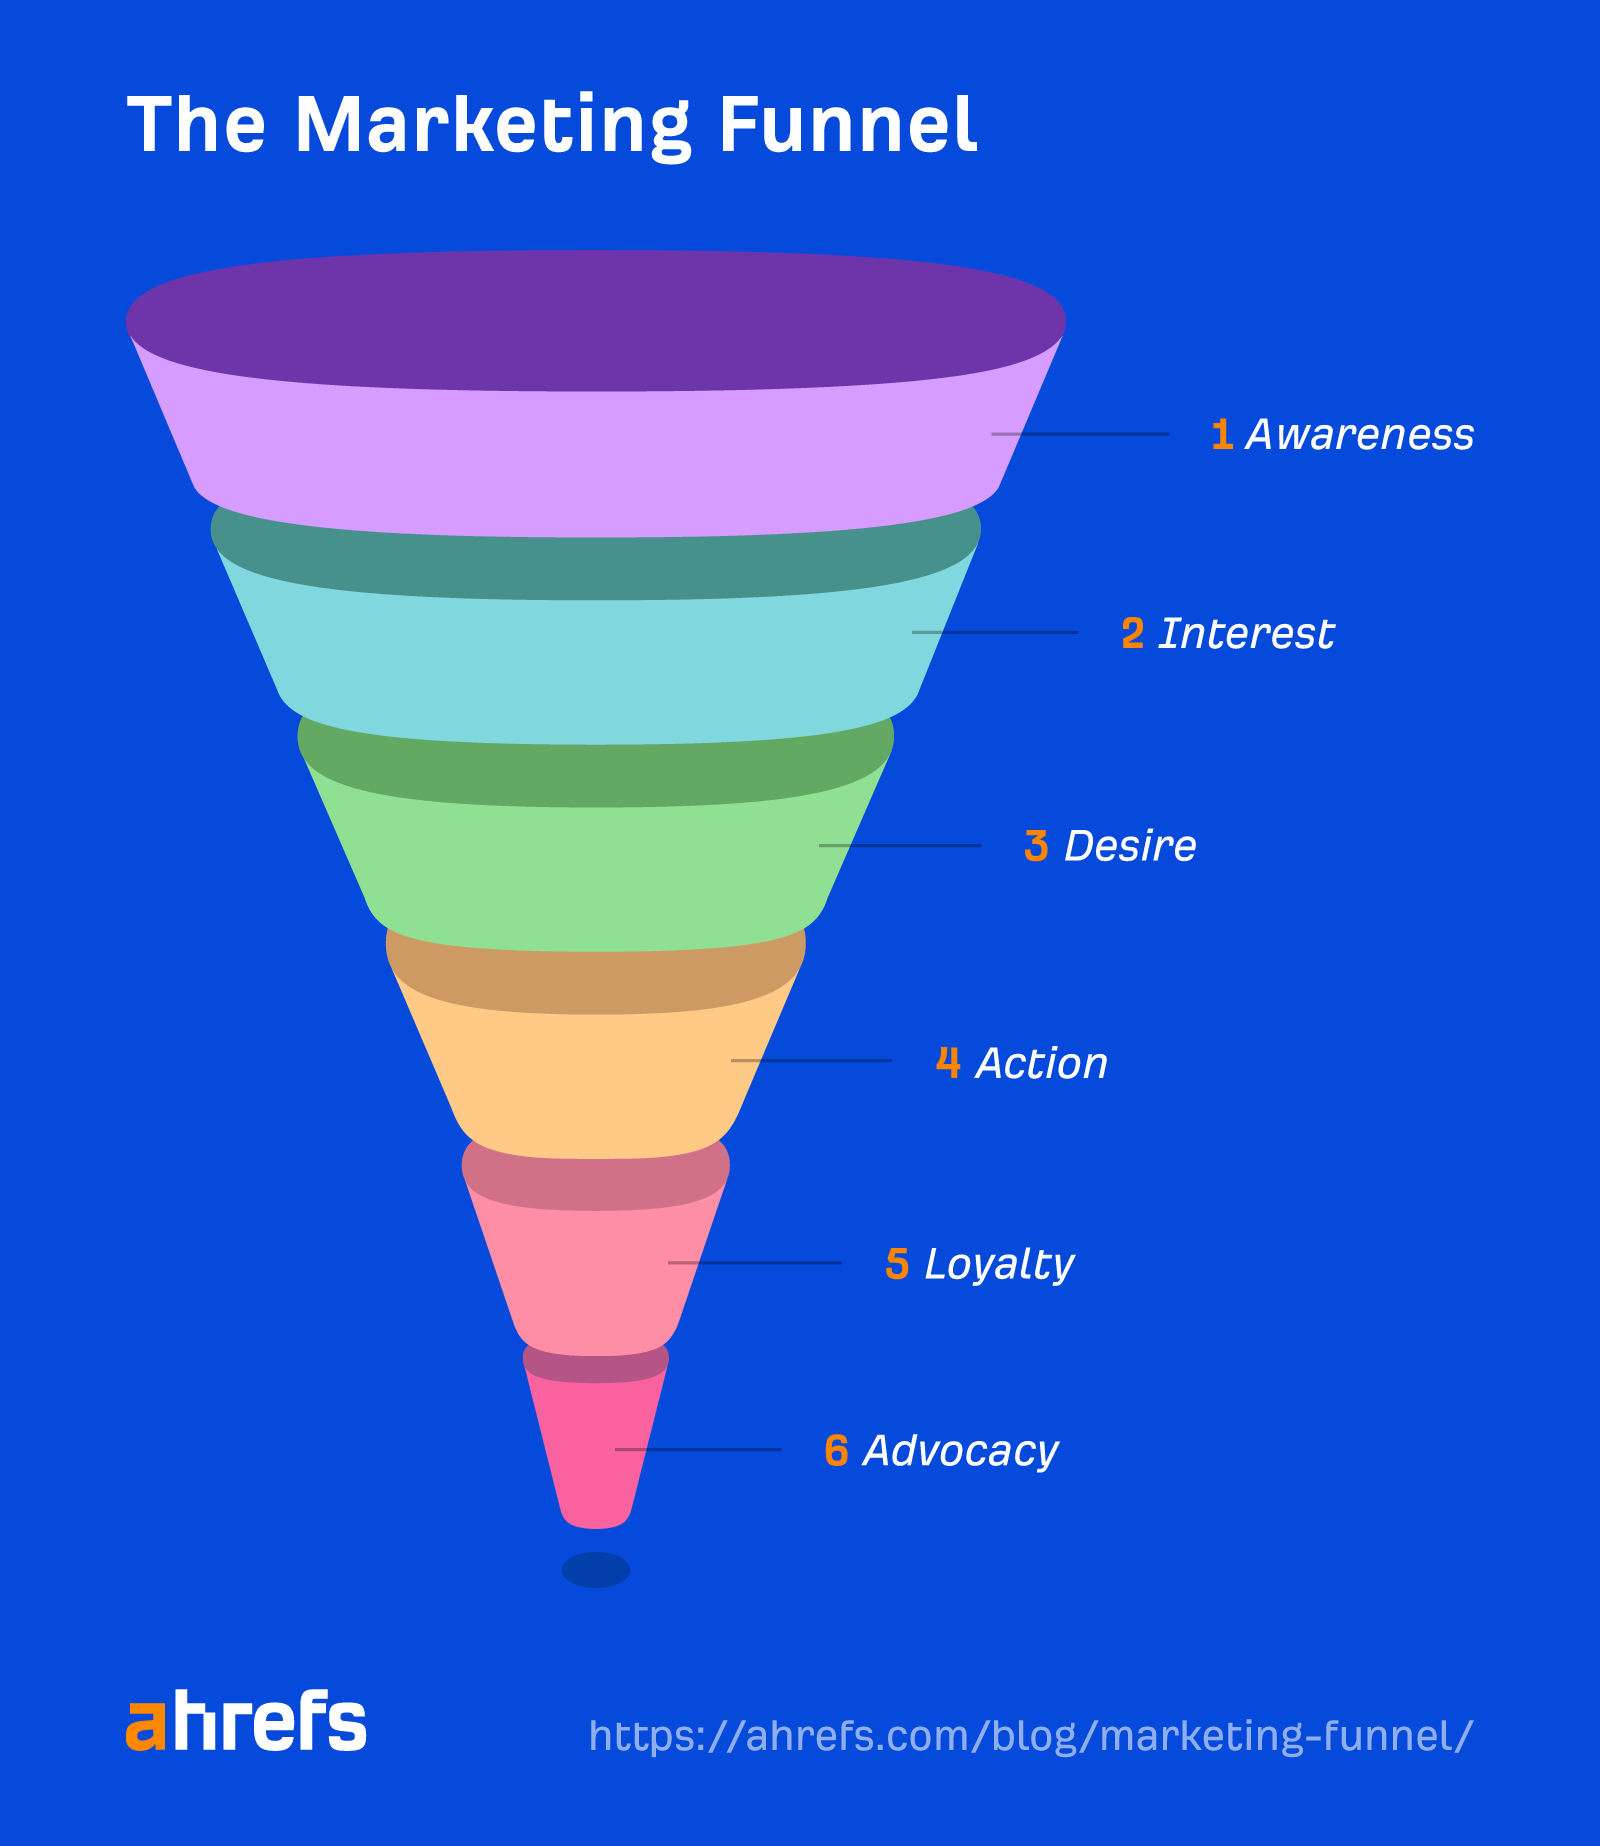 Marketing funnel with awareness, interest, desire, action, loyalty, advocacy steps